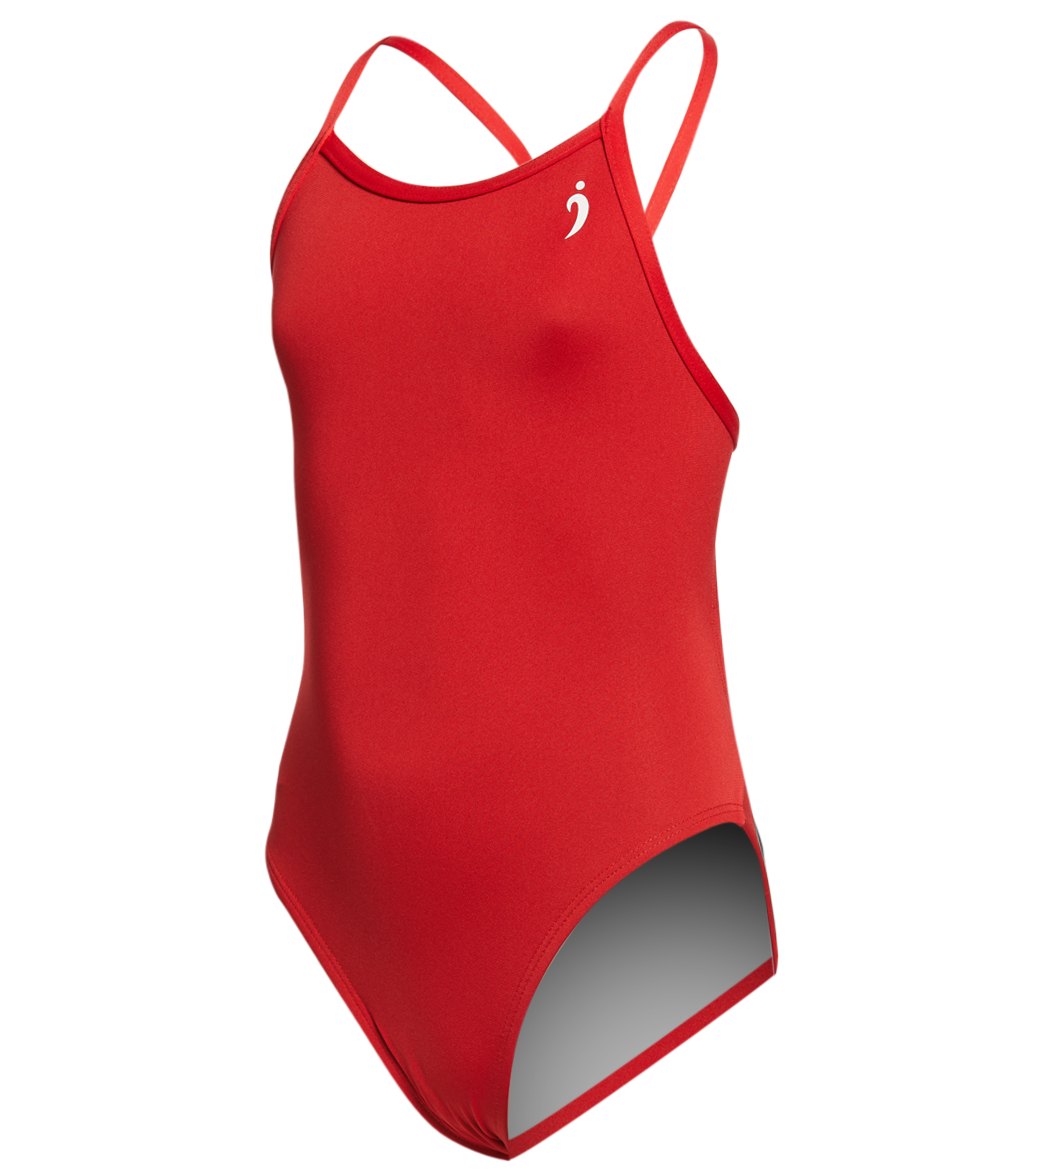 Illusions Activewear Girls' Max Red Thin Strap One Piece Swimsuit - 22 Polyester - Swimoutlet.com